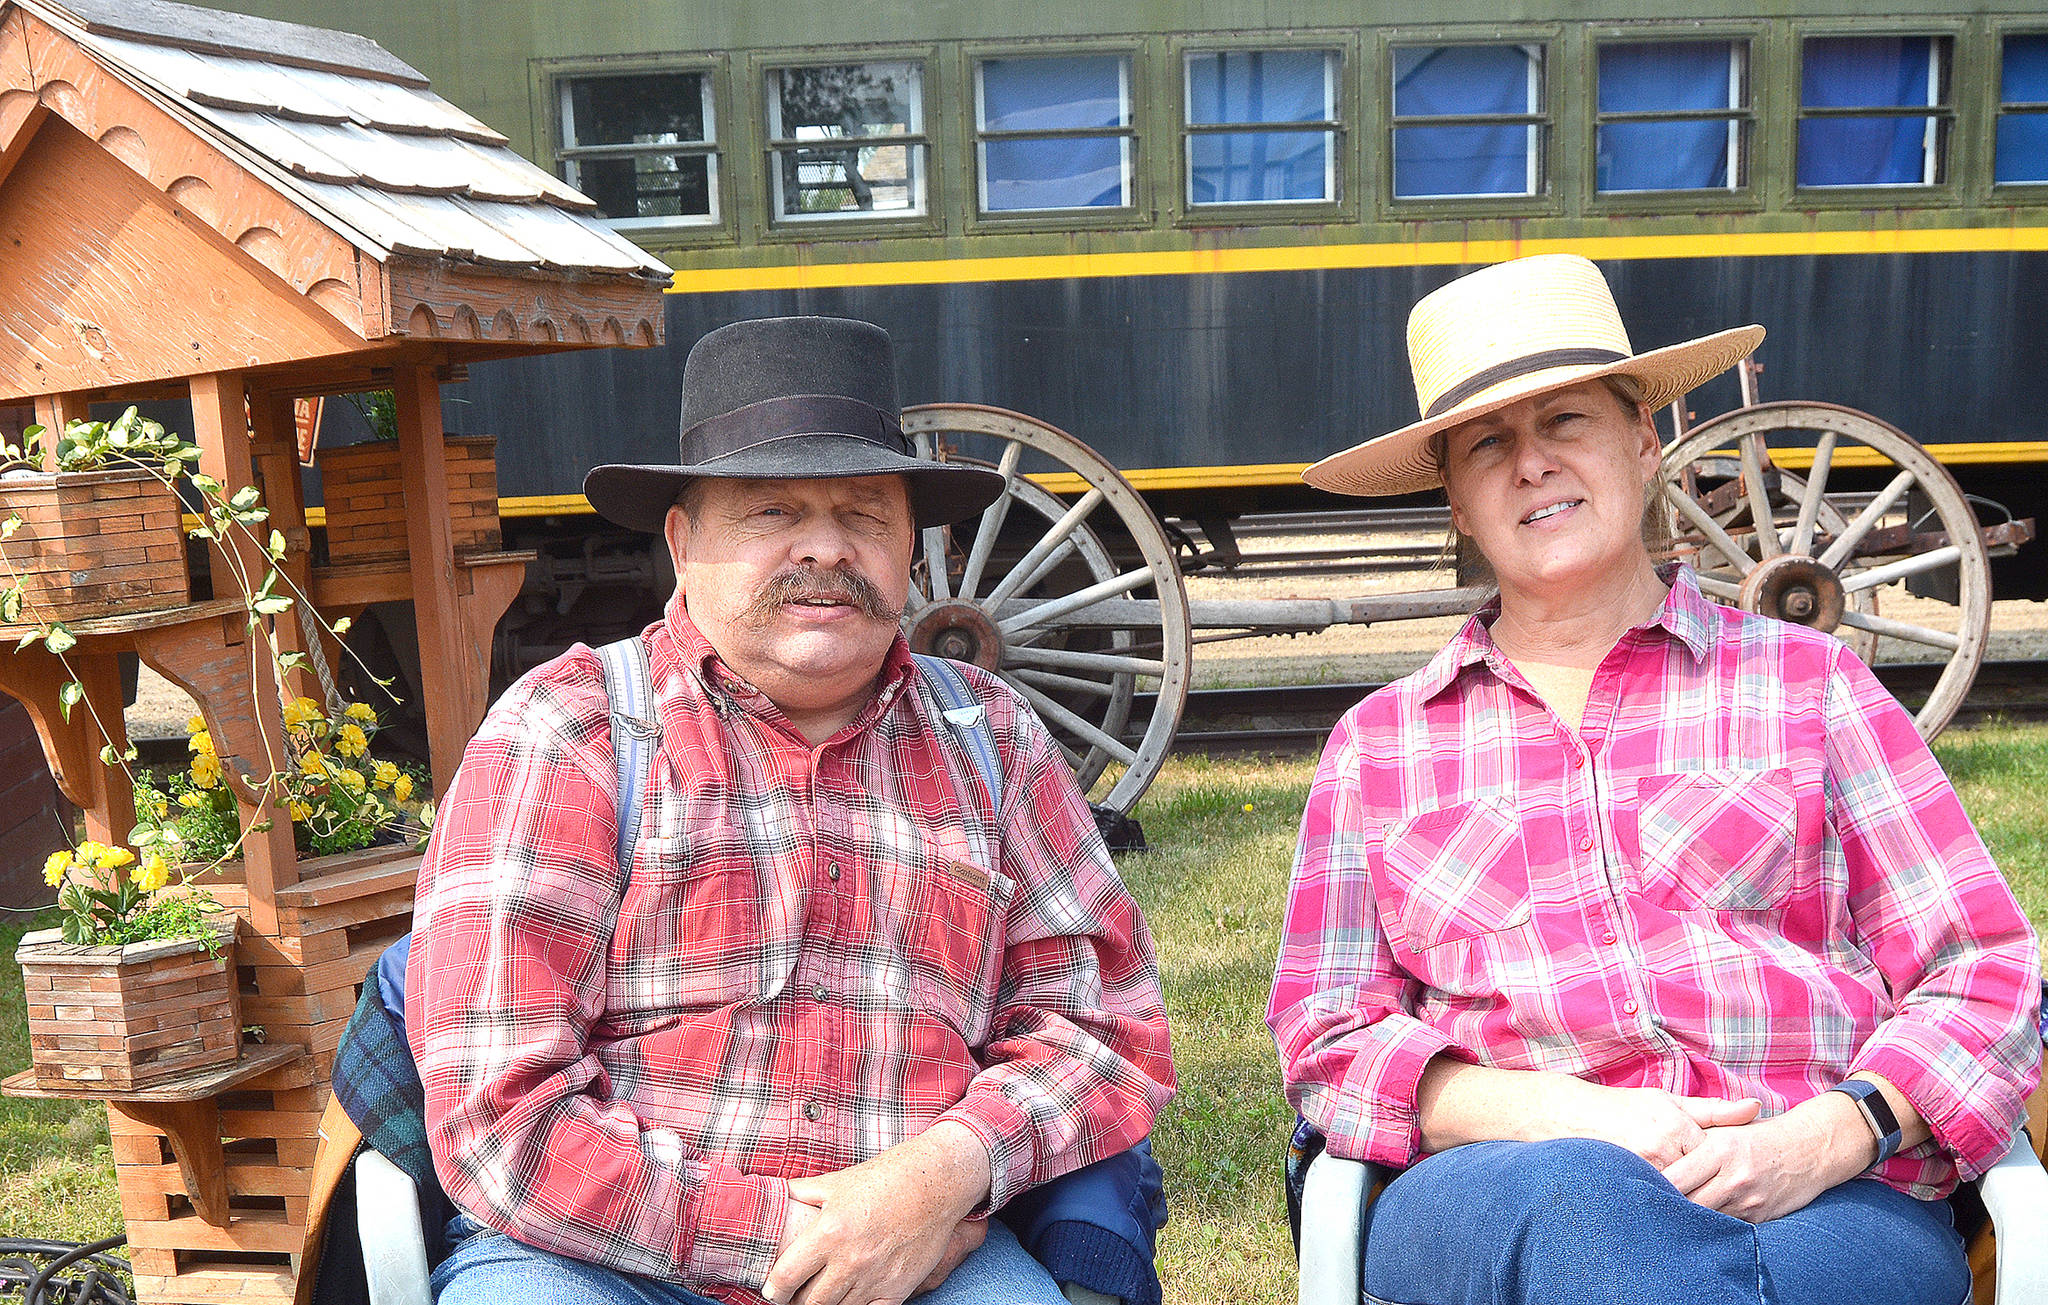 Don and Colleen Wudel from Meeting Lake were on hand at Stettler P & H Elevator Preservation Society’s annual fall supper Aug. 25 to demonstrate how to make rope. (Lisa Joy/Black Press)